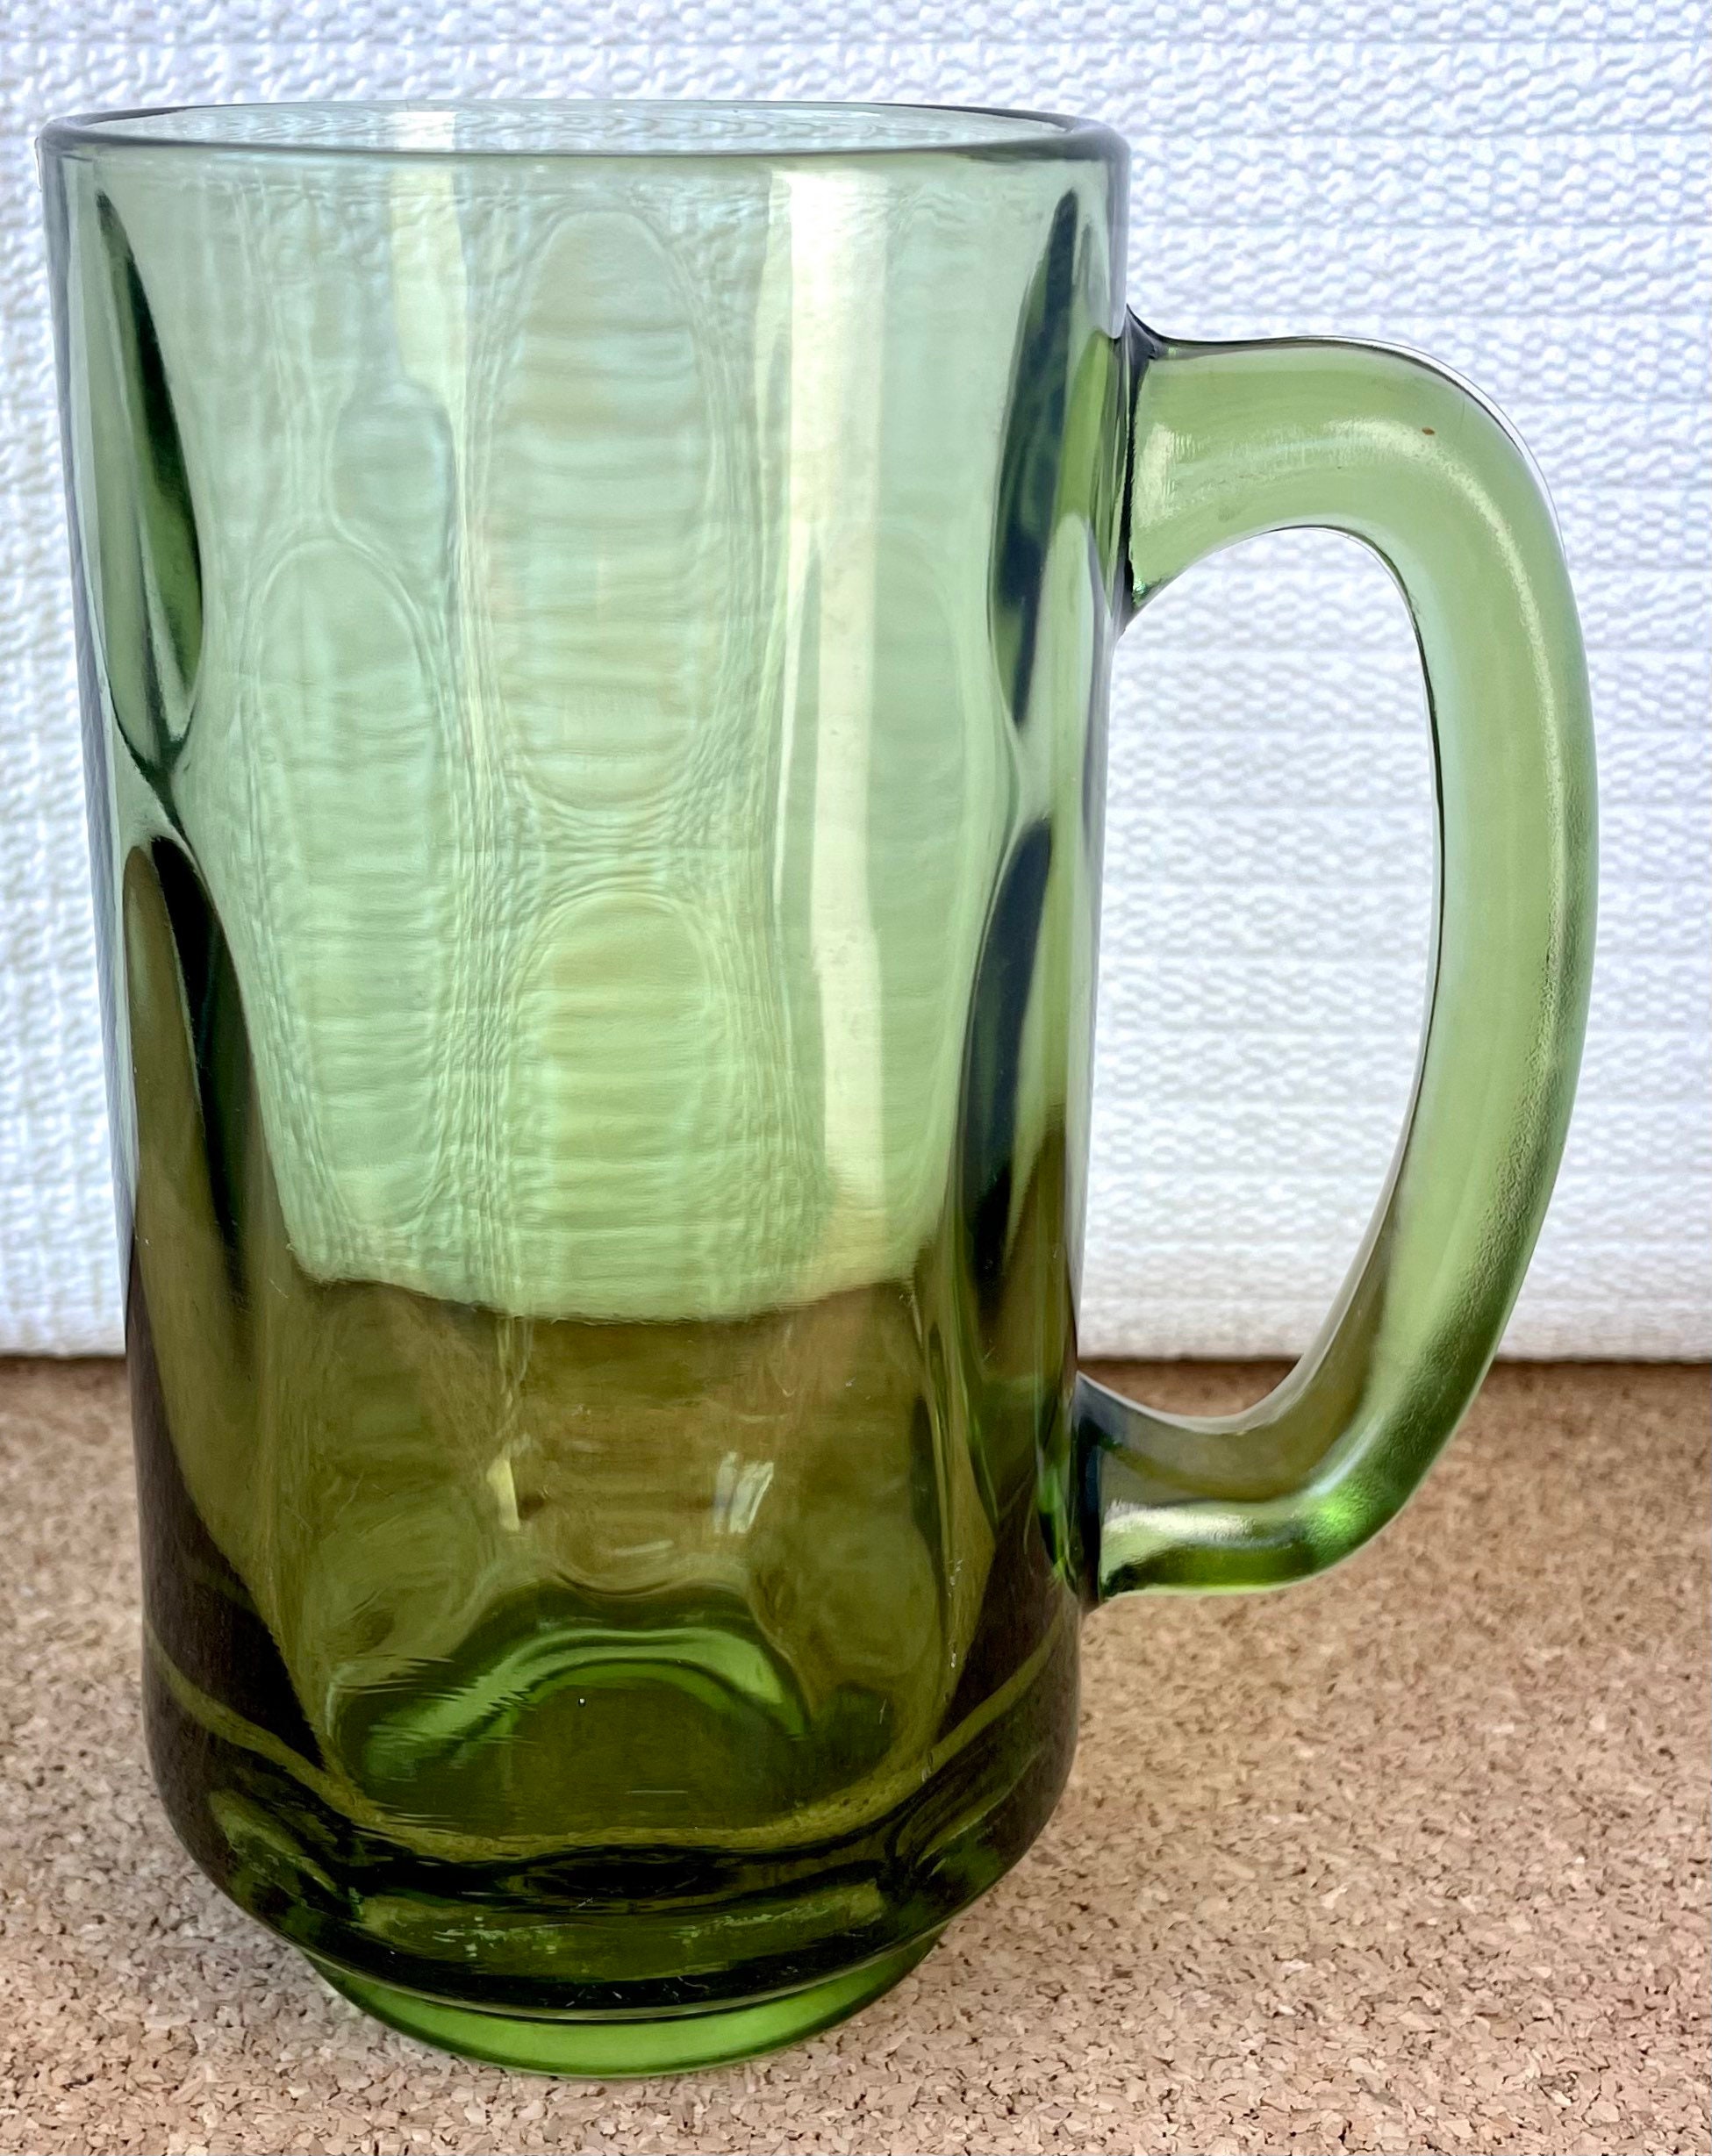 Cute Green Bear illlust Graphic Clear Mugs Glasses Prints Vintage Cups